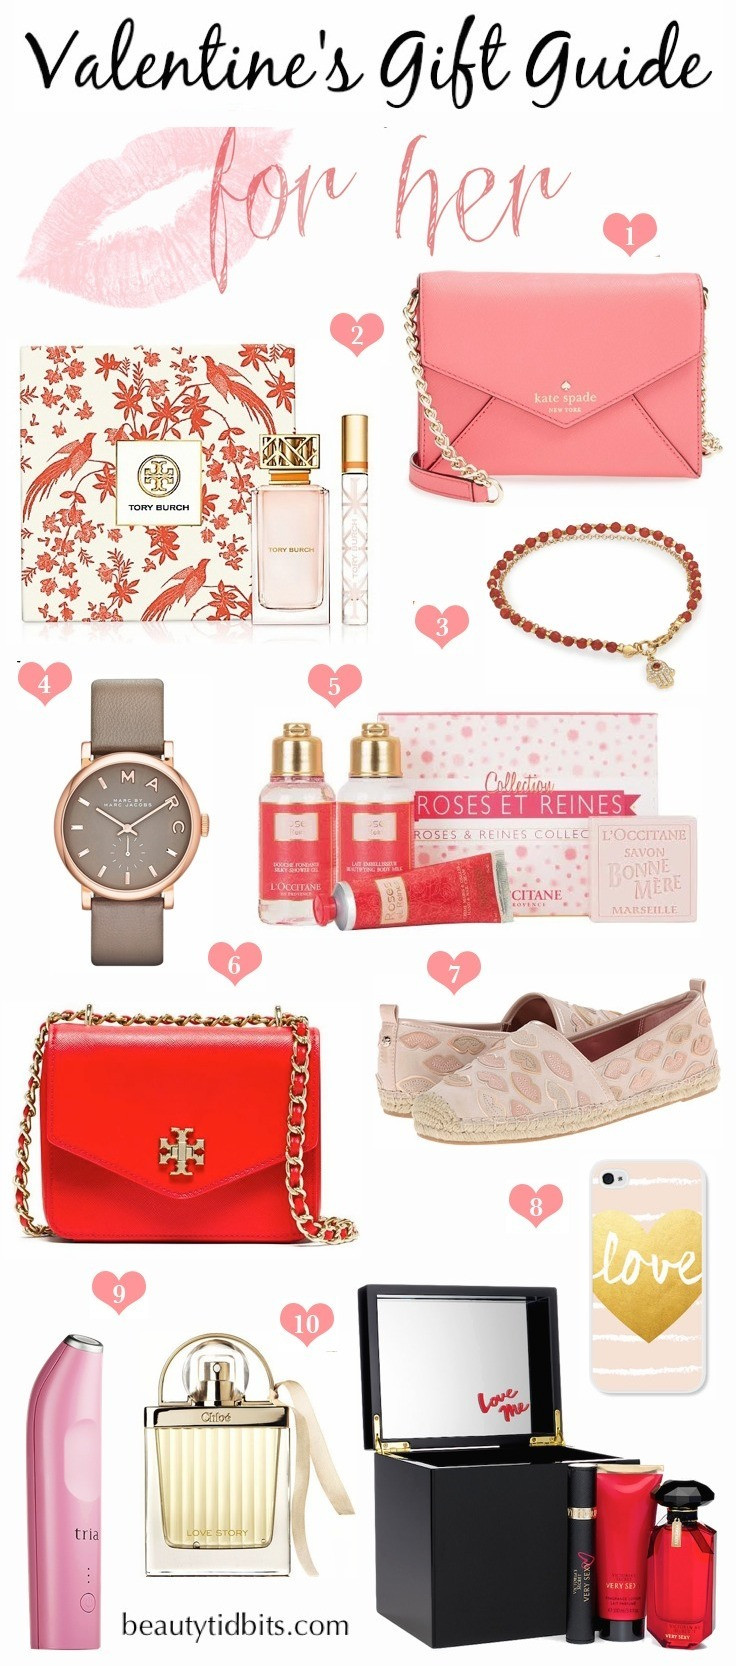 Valentines Day Gift Ideas For Her
 Valentine s Day Gift Guide For Her